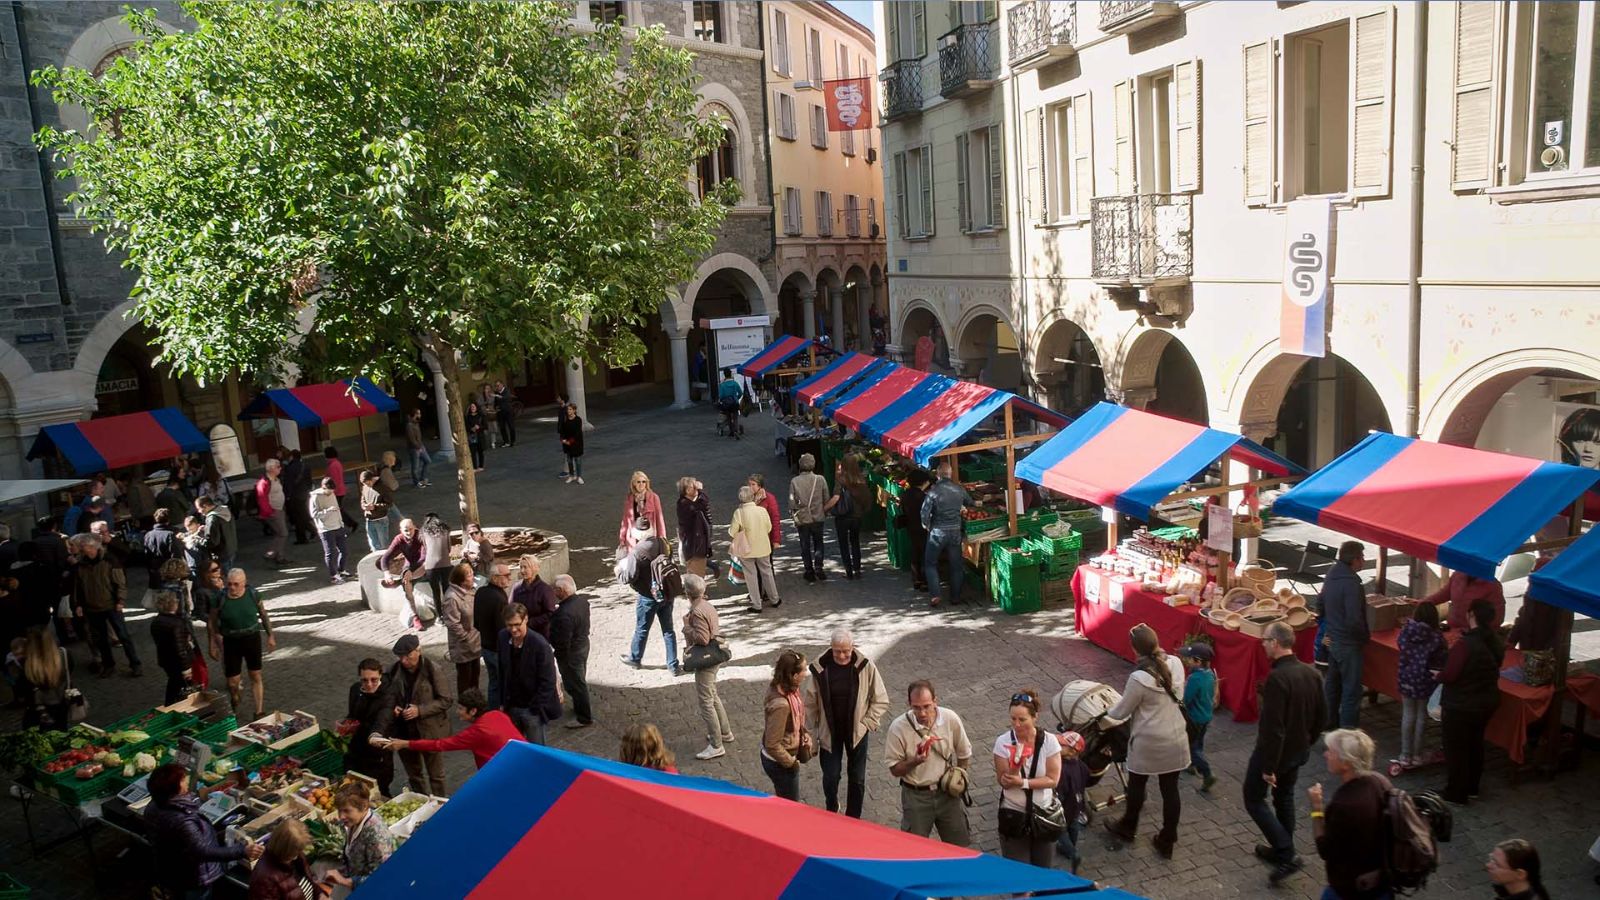 Piazza Nosetto, the market on Saturday morning